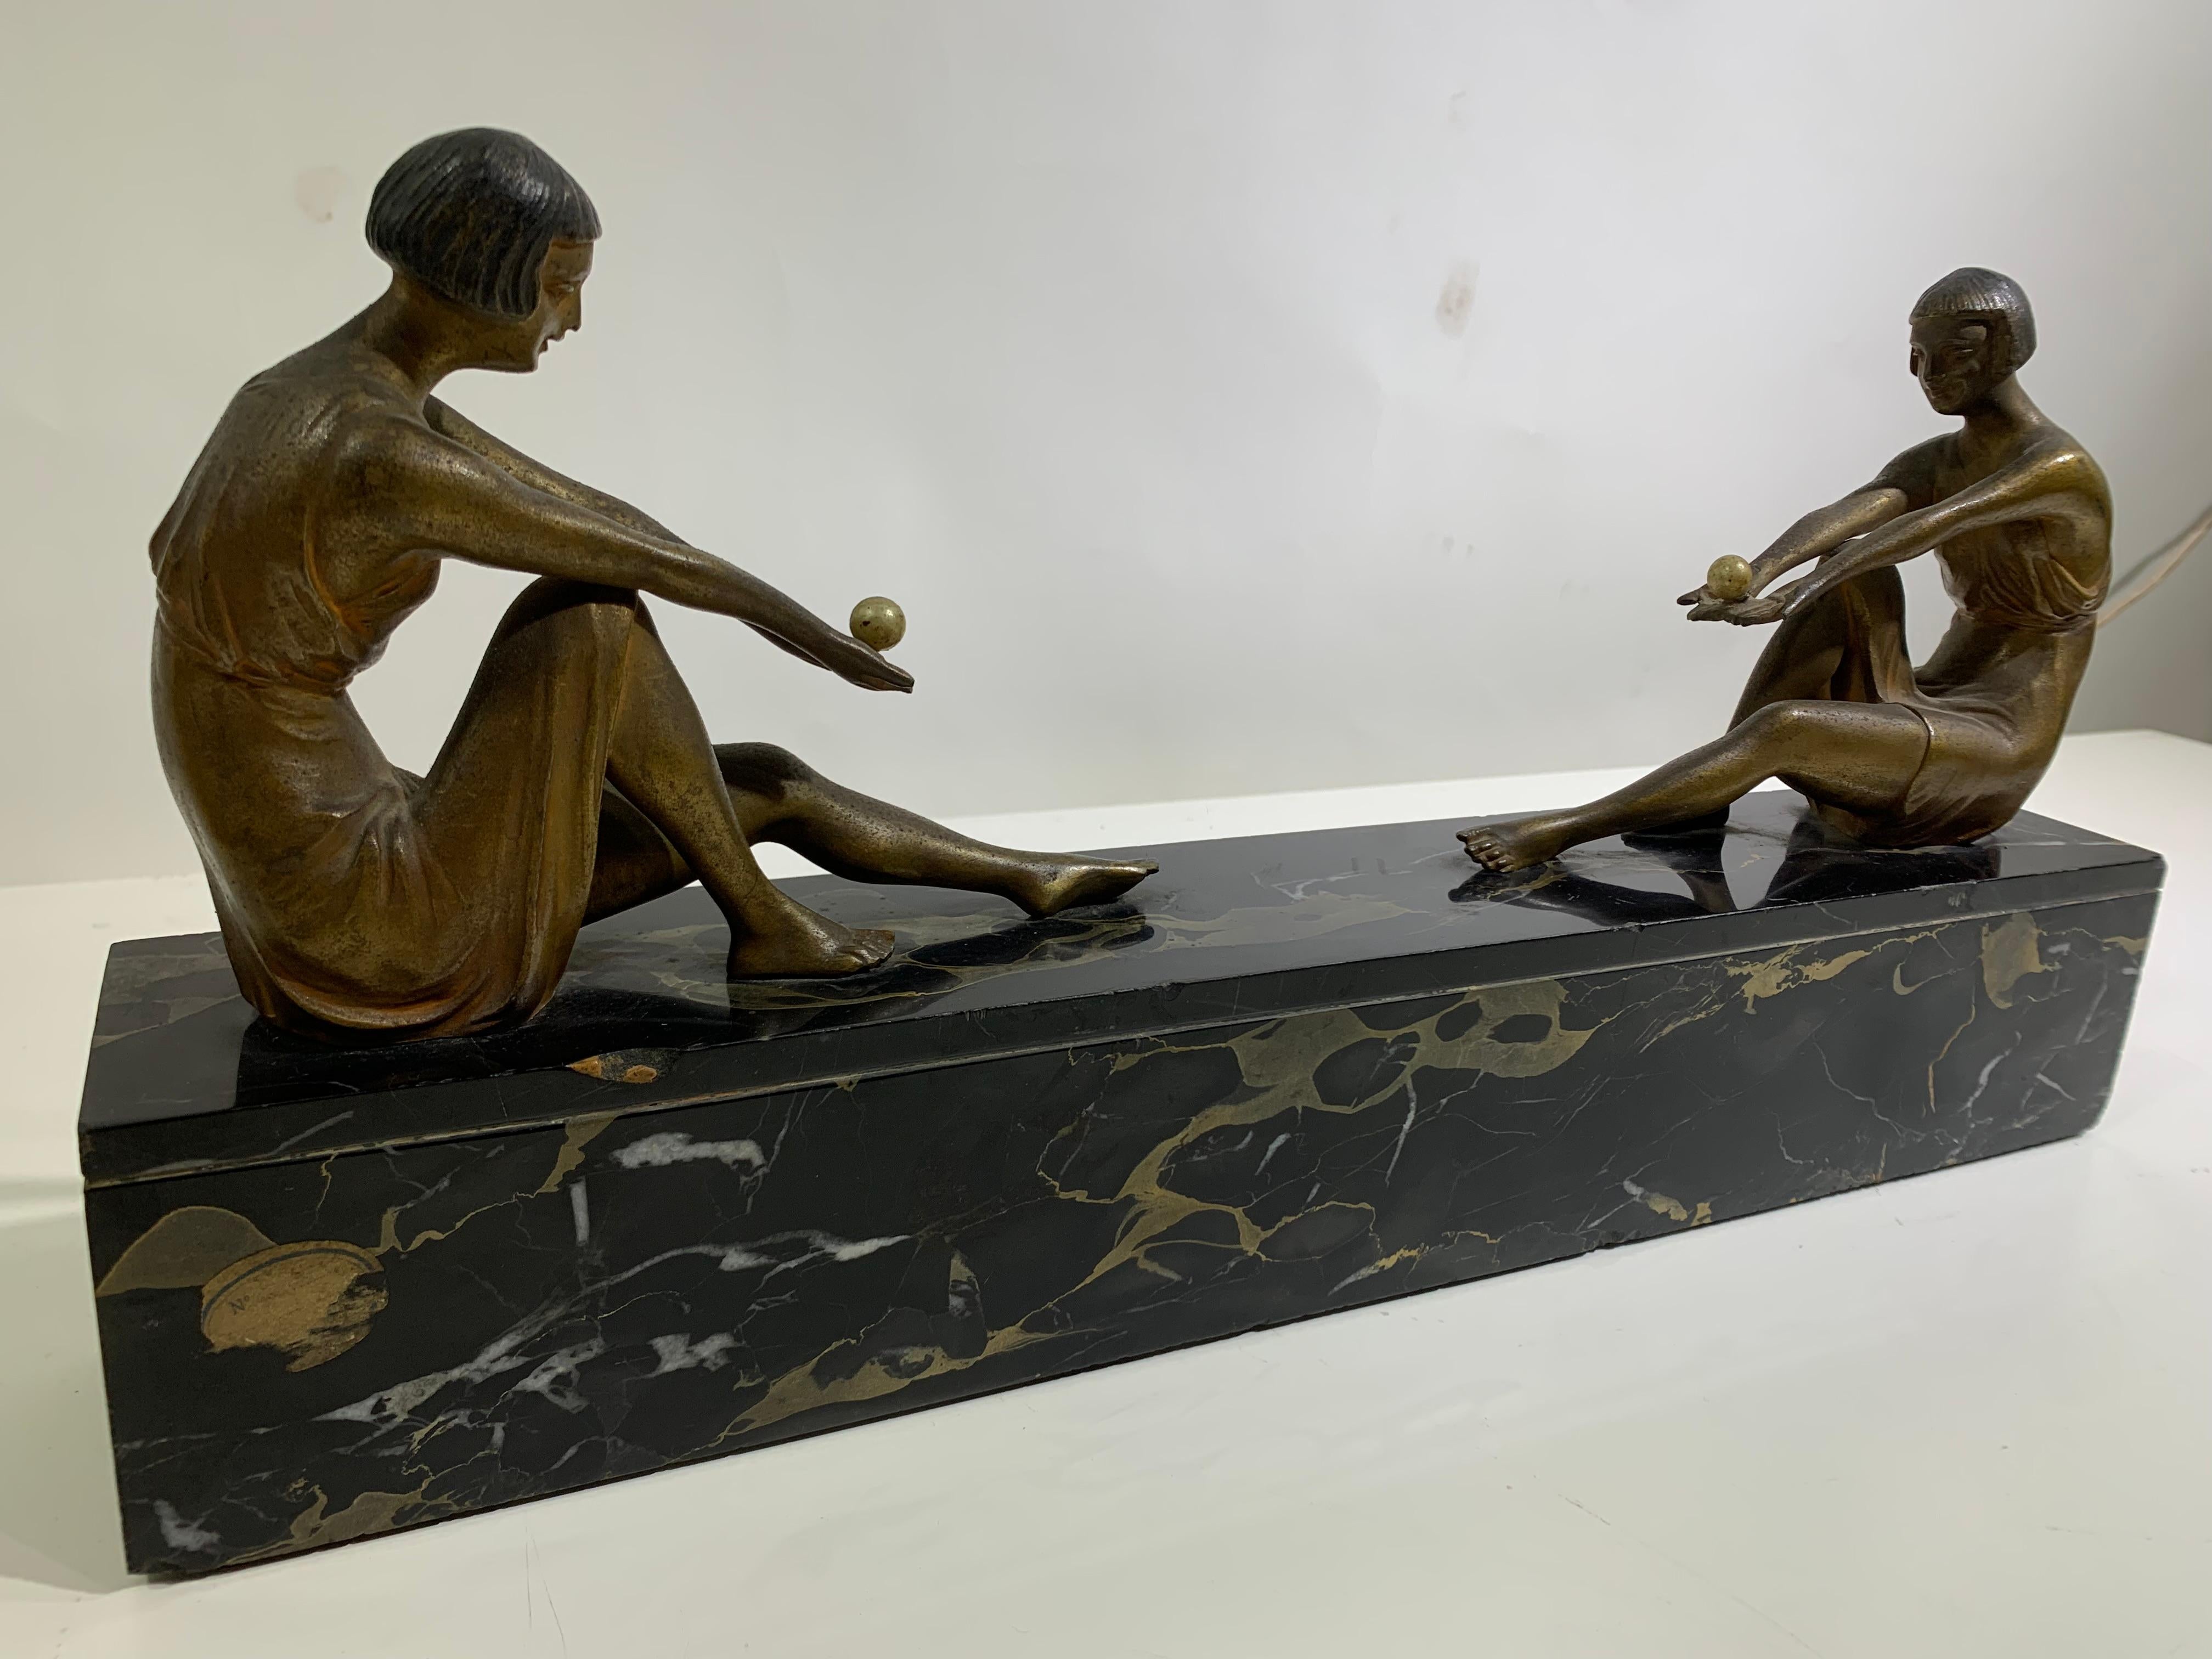 Art Deco bronze statue of two young women facing each other resting on a solid marble base. 
Dressed in the fashion of the day with curled bob hair cuts.